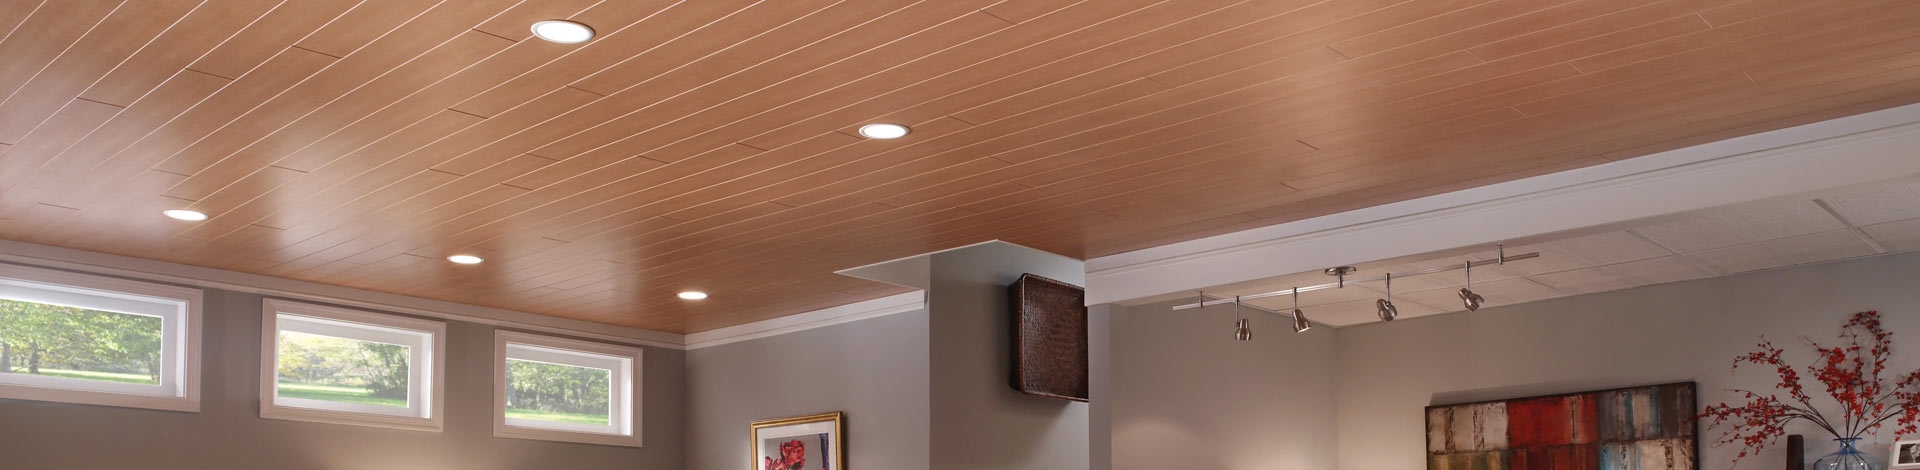 Armstrong Ceiling Tile Plastic